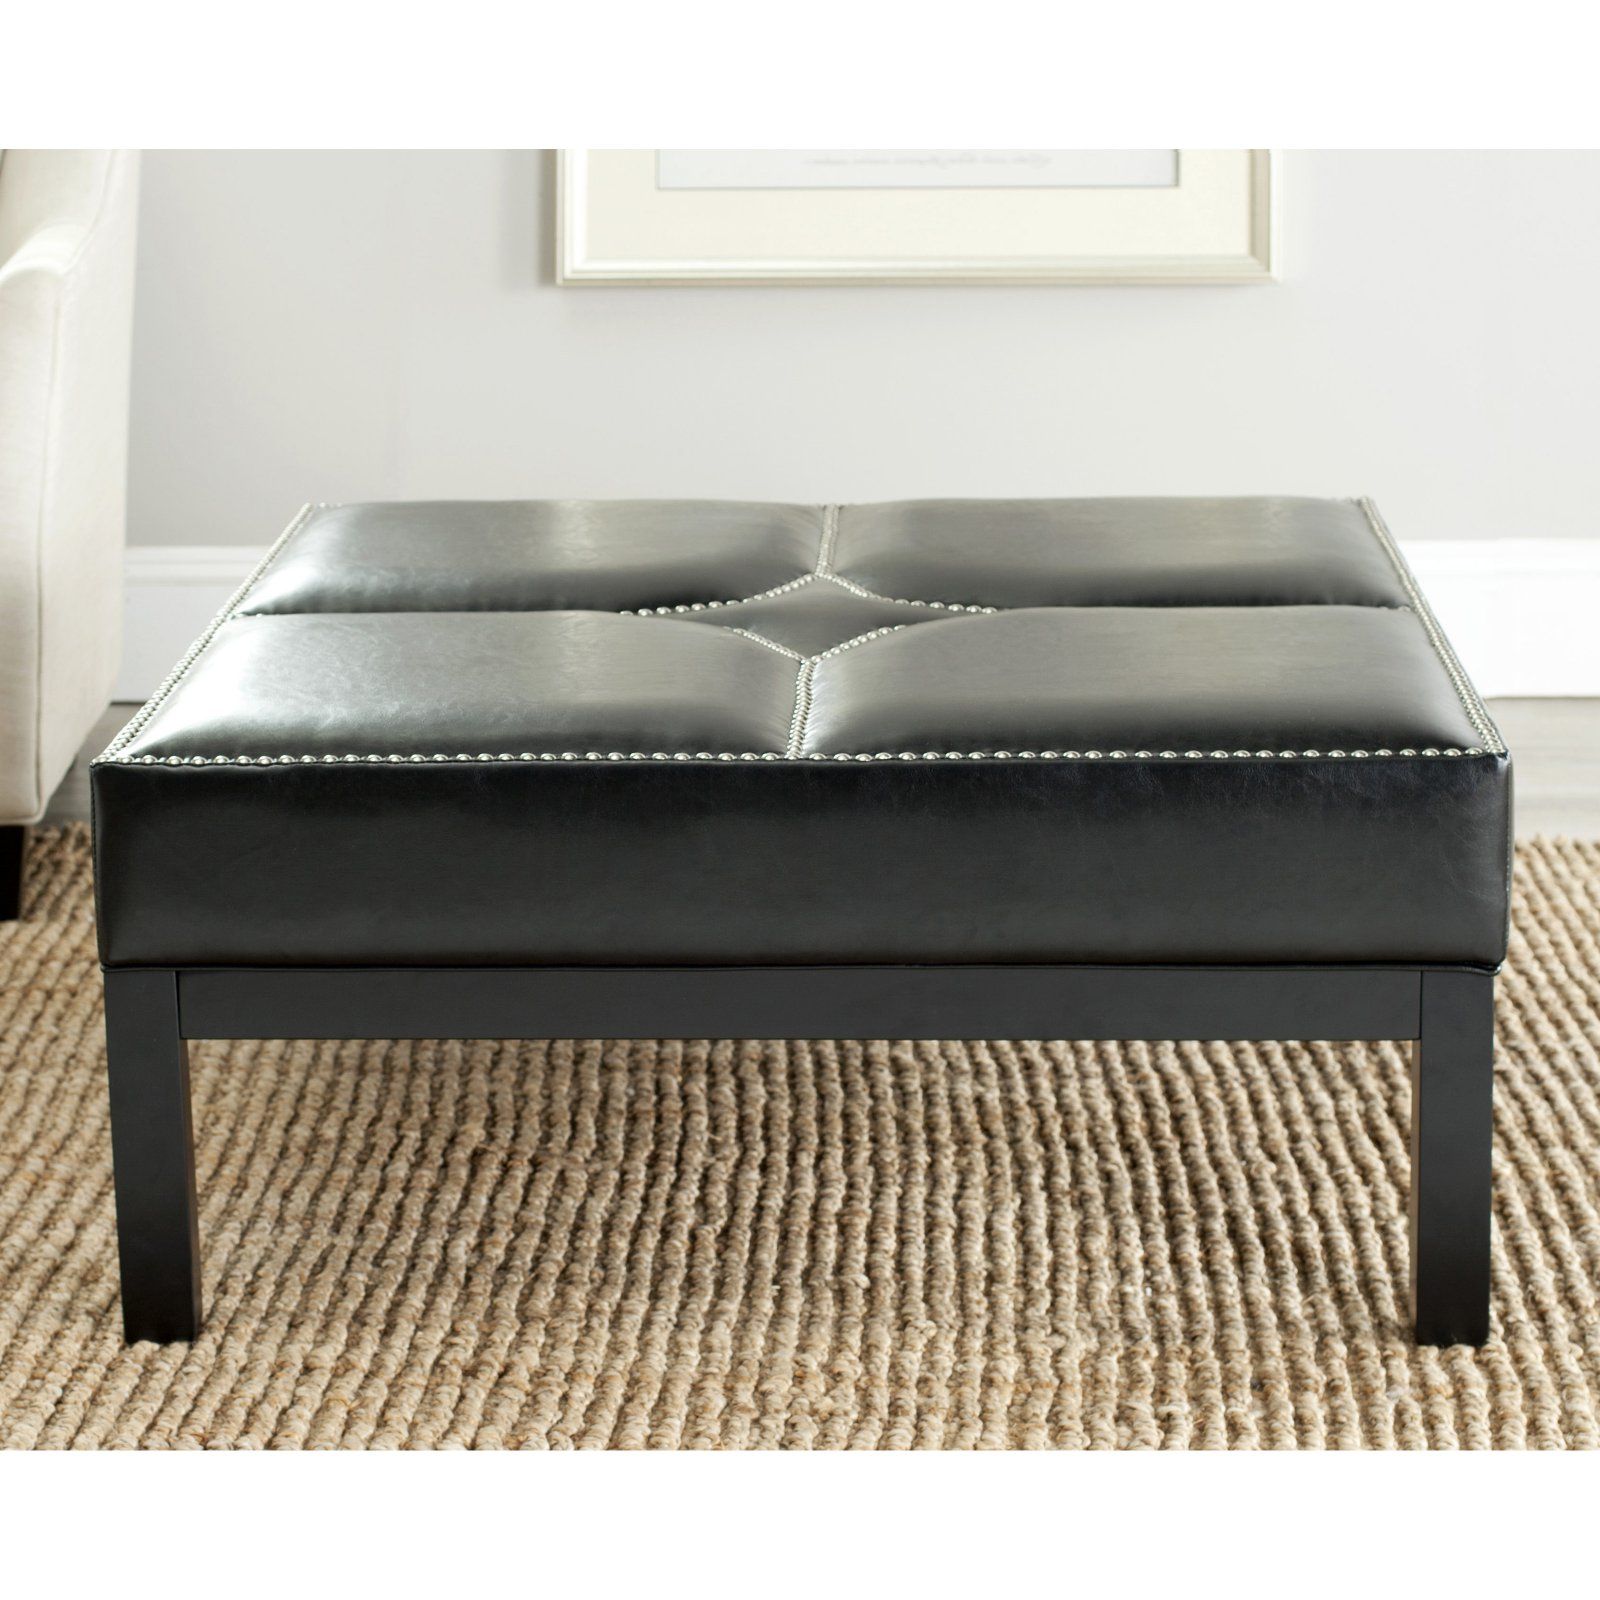 Widely Used Black White Leather Pouf Ottomans In Safavieh Terrence Leather Cocktail Ottoman – Walmart – Walmart (View 8 of 10)